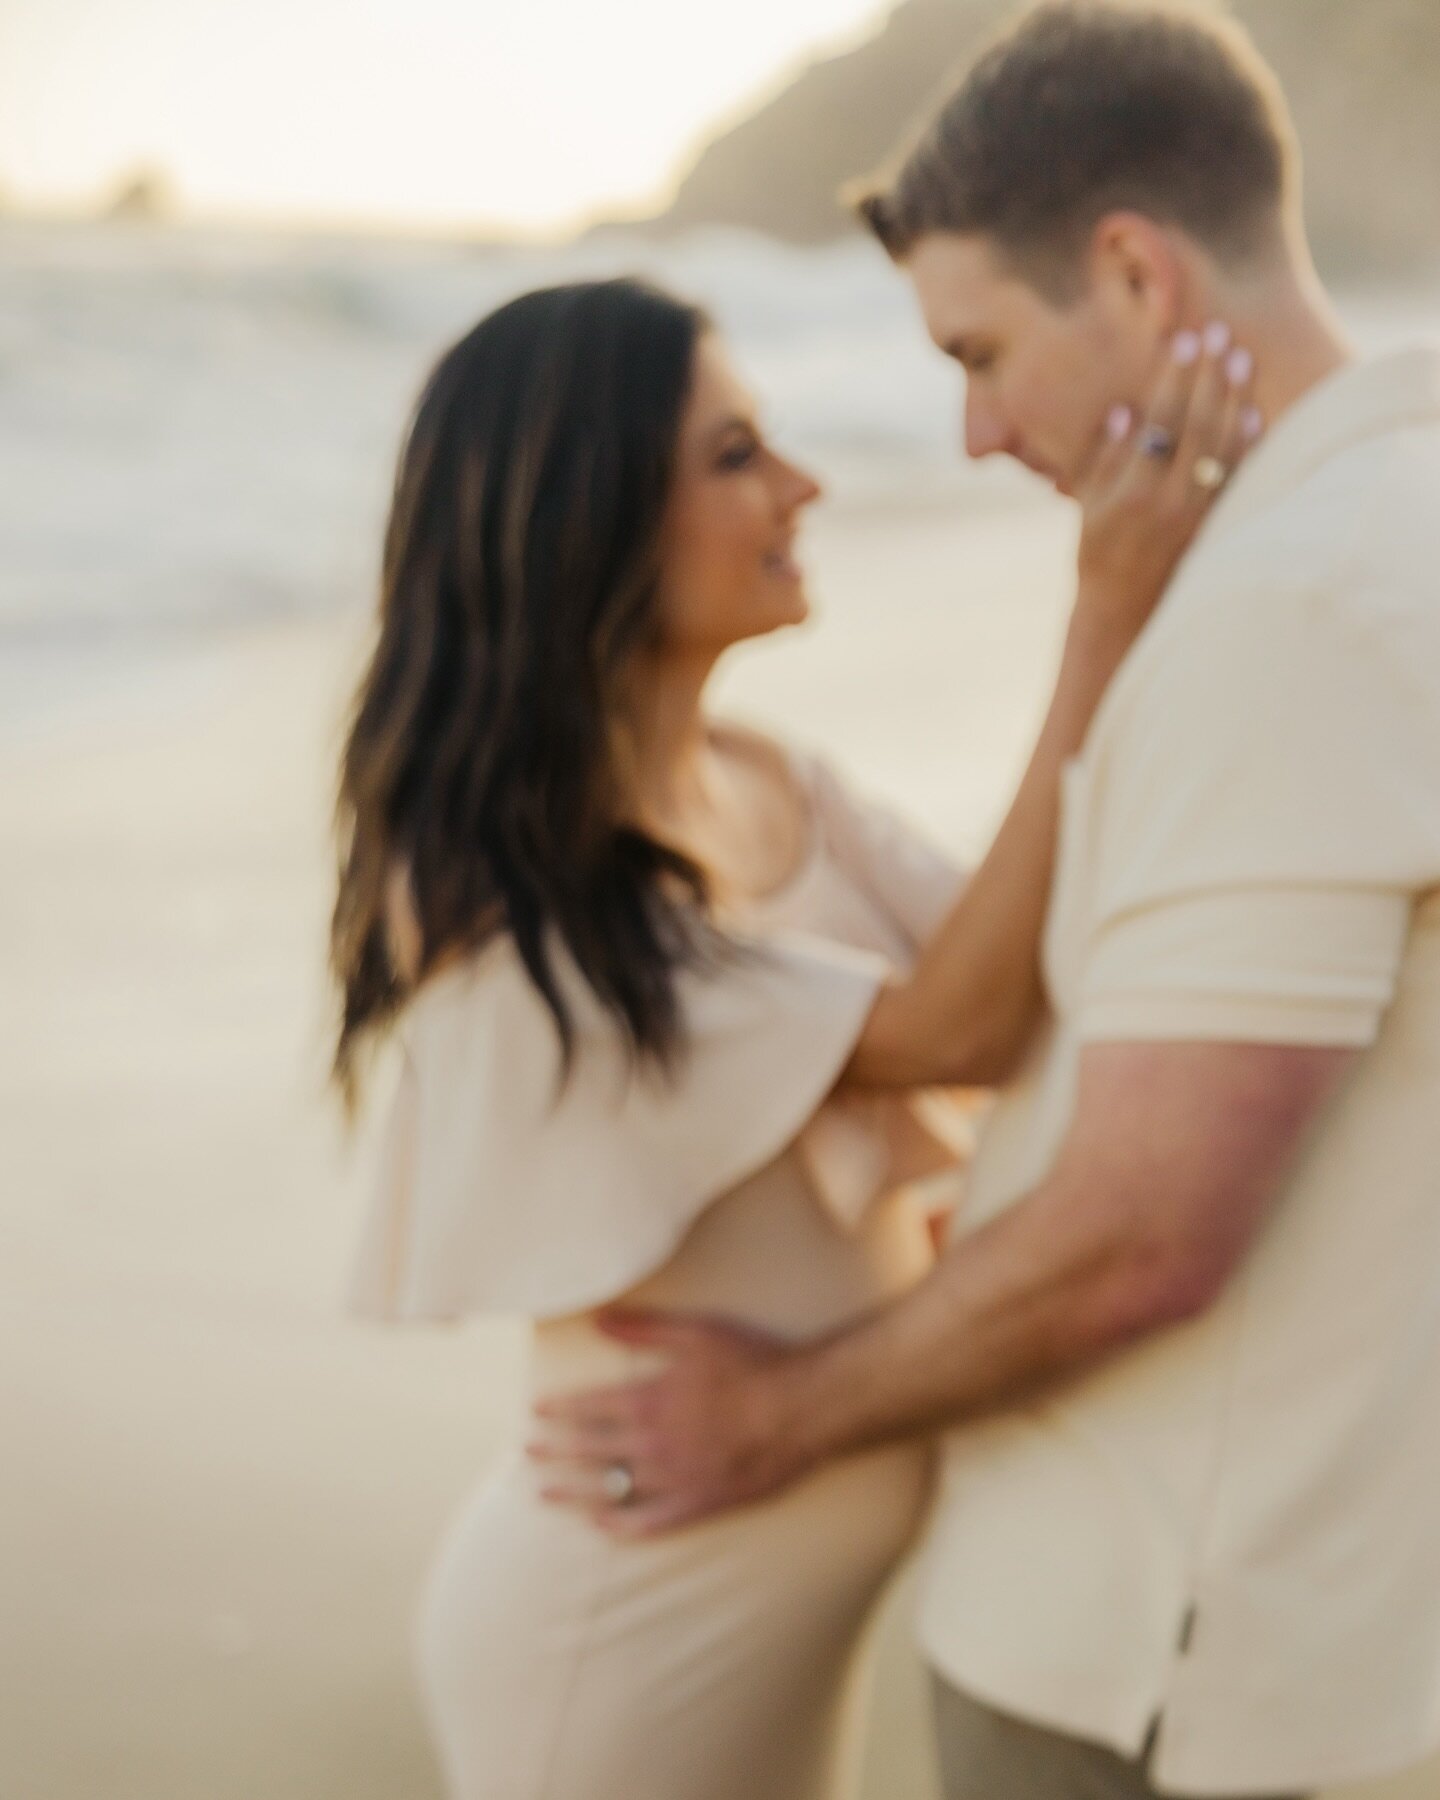 Maternity photography is so special, I love to find the beauty in the blur 🤍

#NewportBeachFamilyPhotographer
#FamilyPhotographyOC
#NewportBeachKids
#OrangeCountyFamilies
#FamilyPortraitSessions
#SoCalFamilyPhotography
#FamilyMomentsNB
#NewportBeach